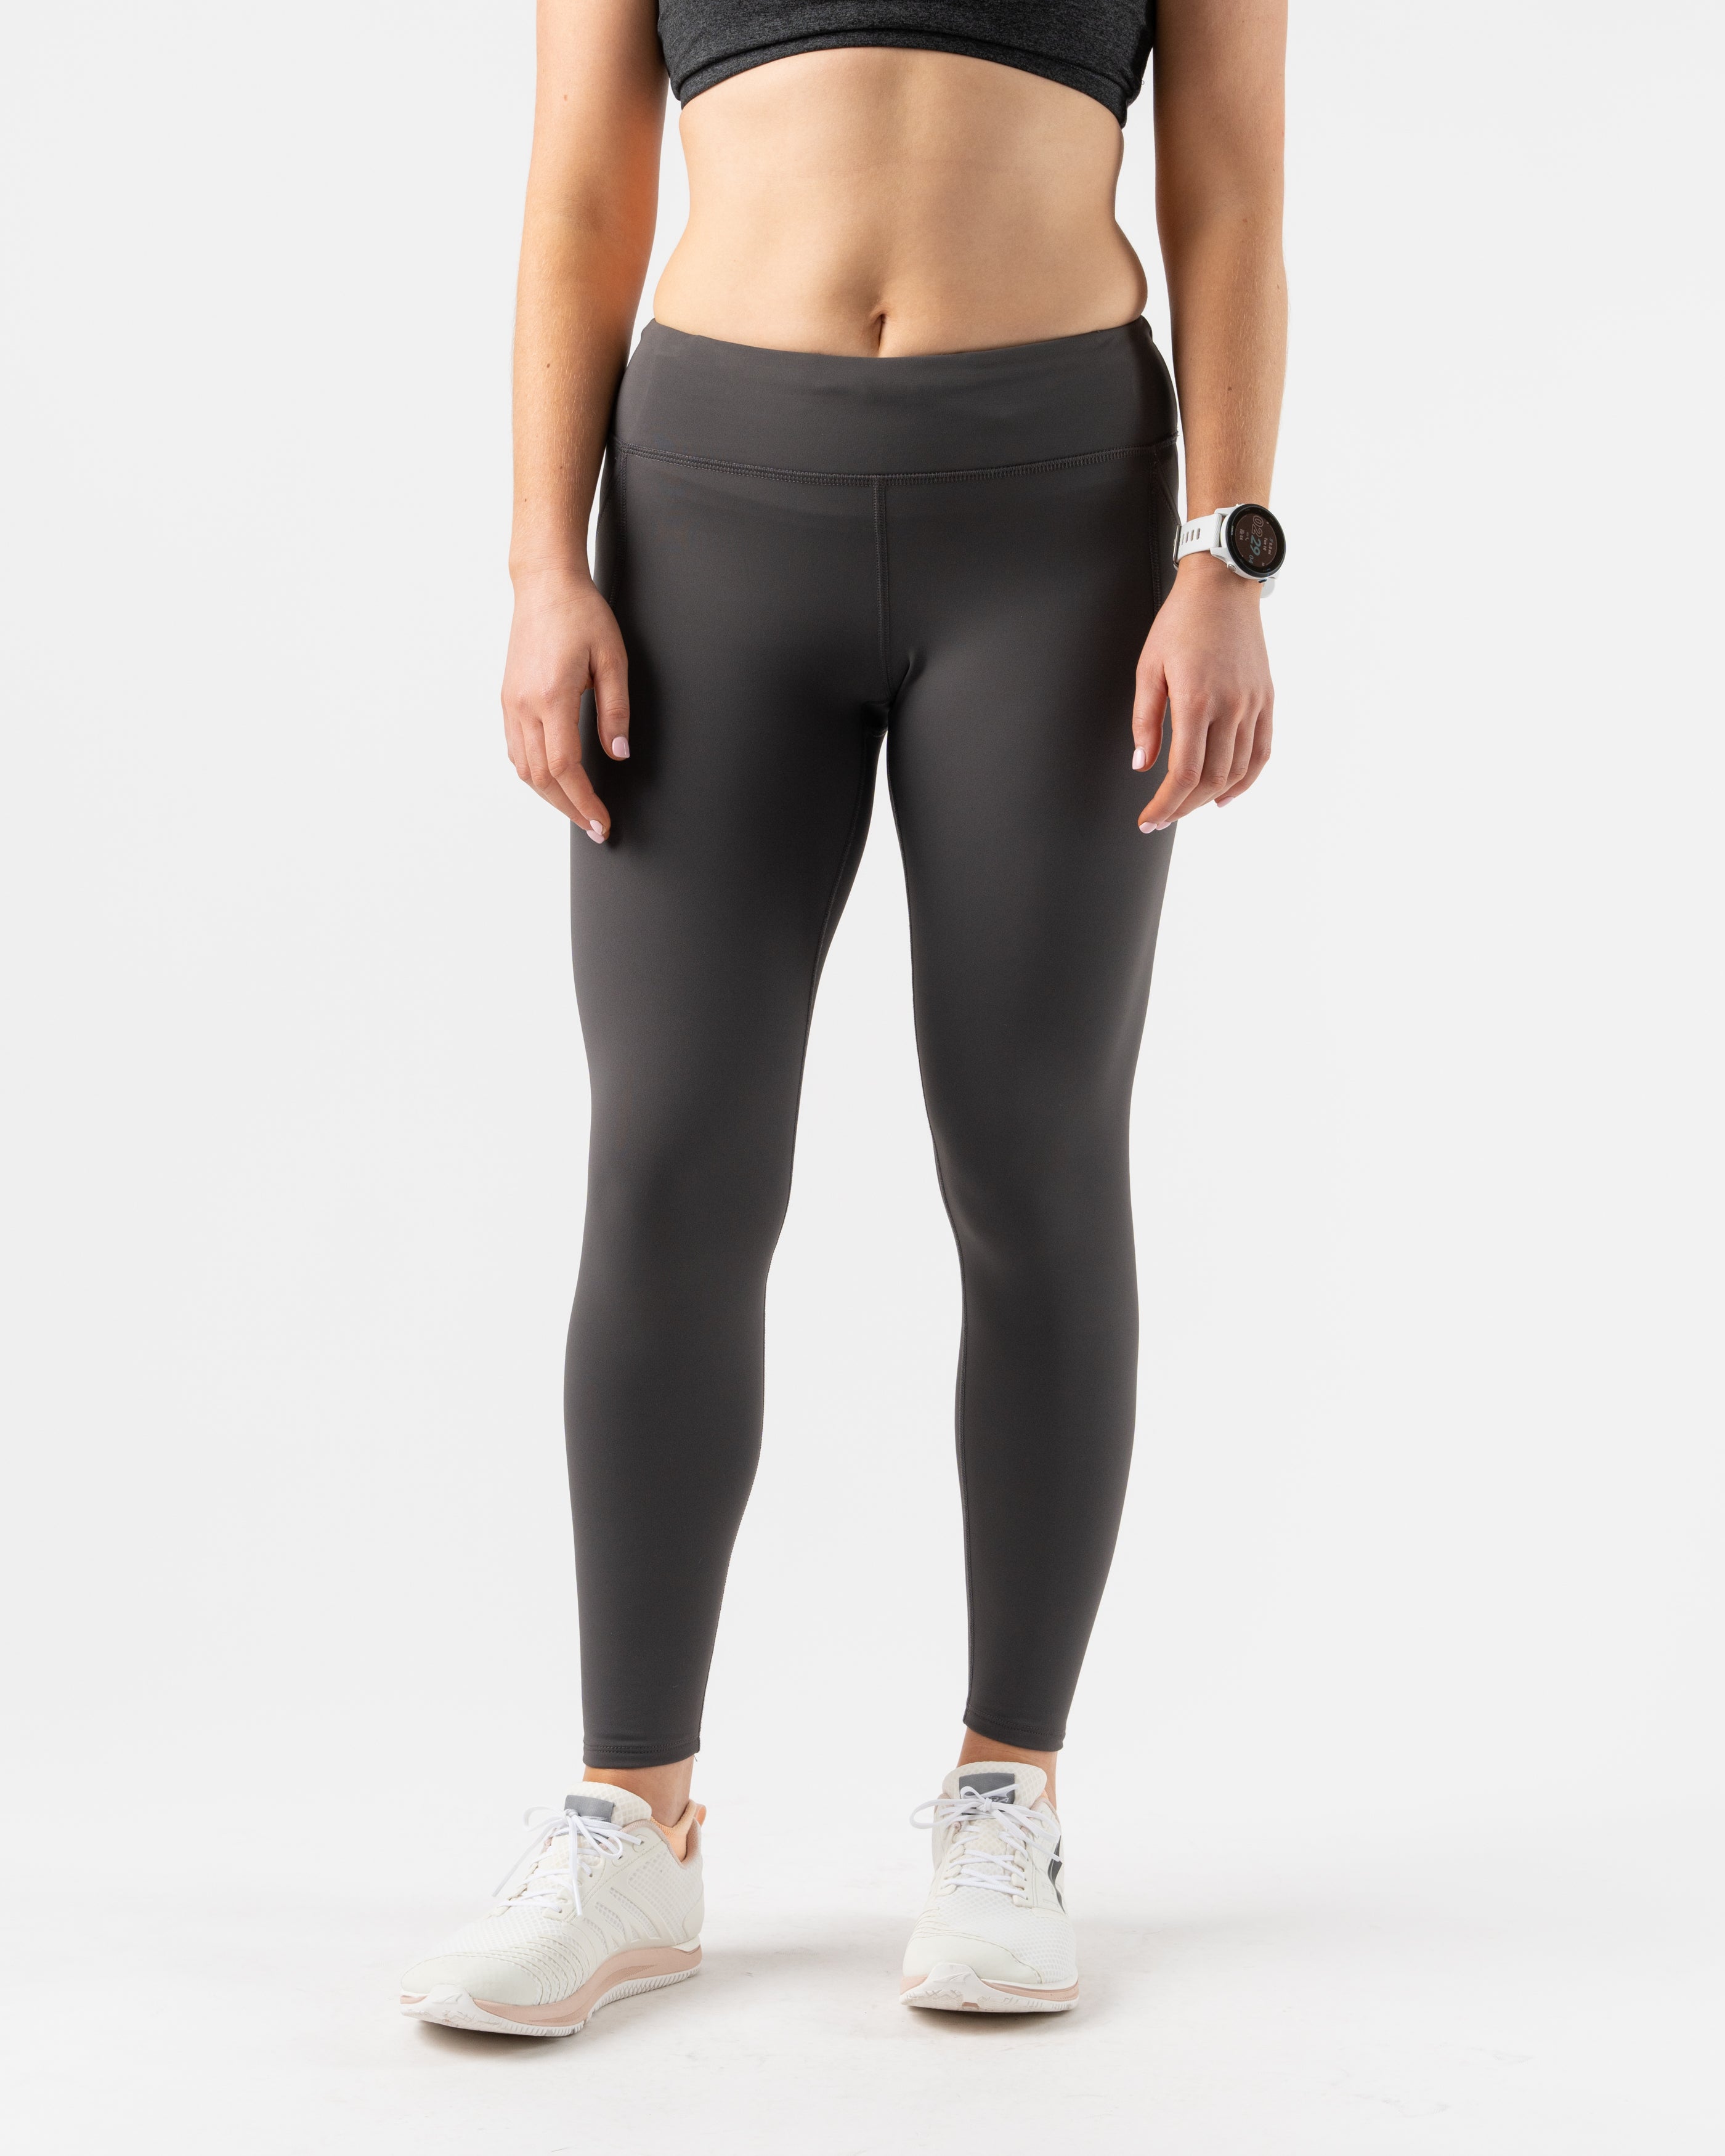 Up To 80% Off on Women Fleece Thermal Tights S